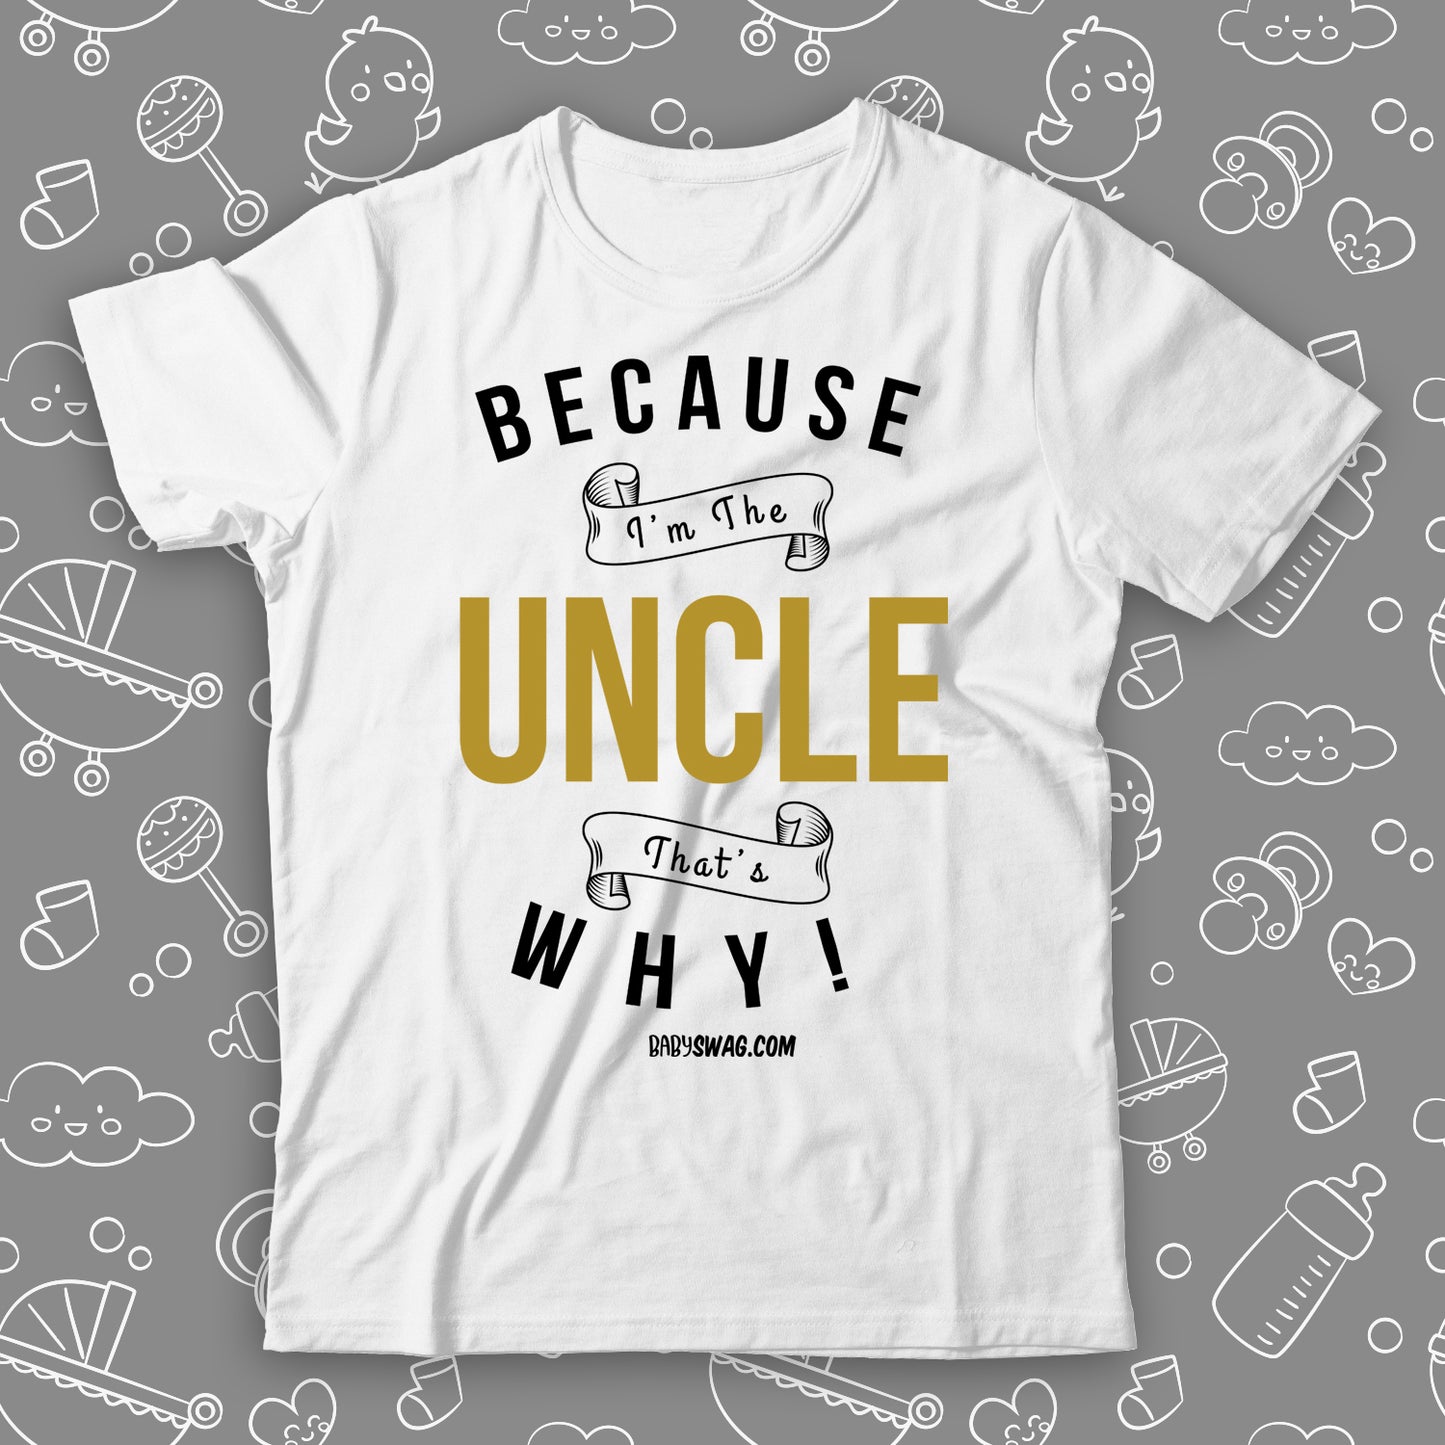 Because I'm The Uncle That's Why!